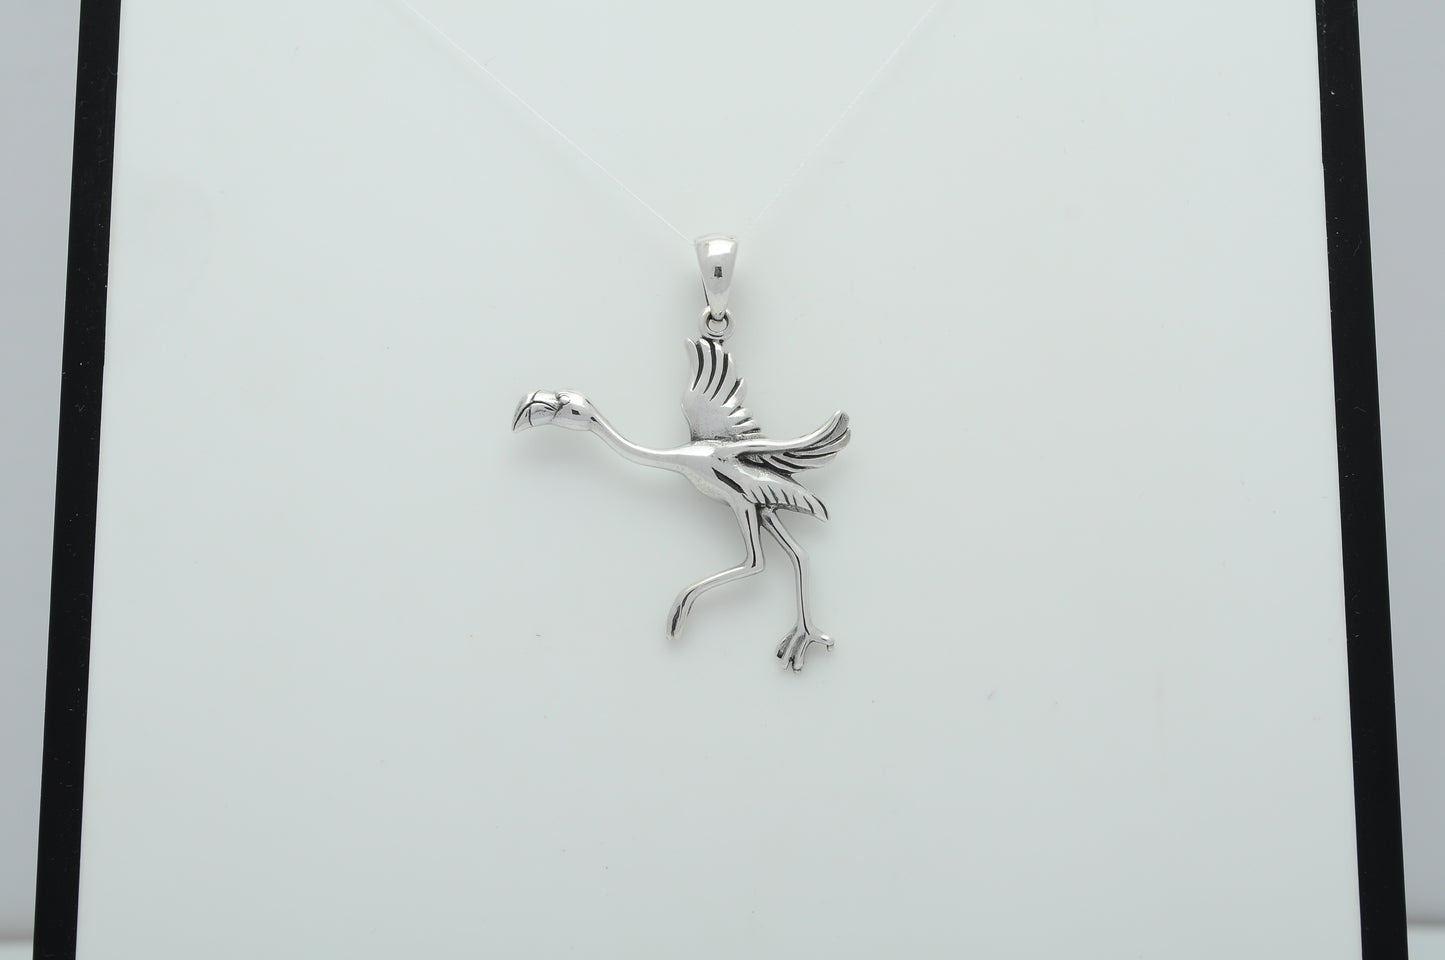 Flamingo Silver Pewter Charm Necklace Pendant Jewelry With Cotton Cord